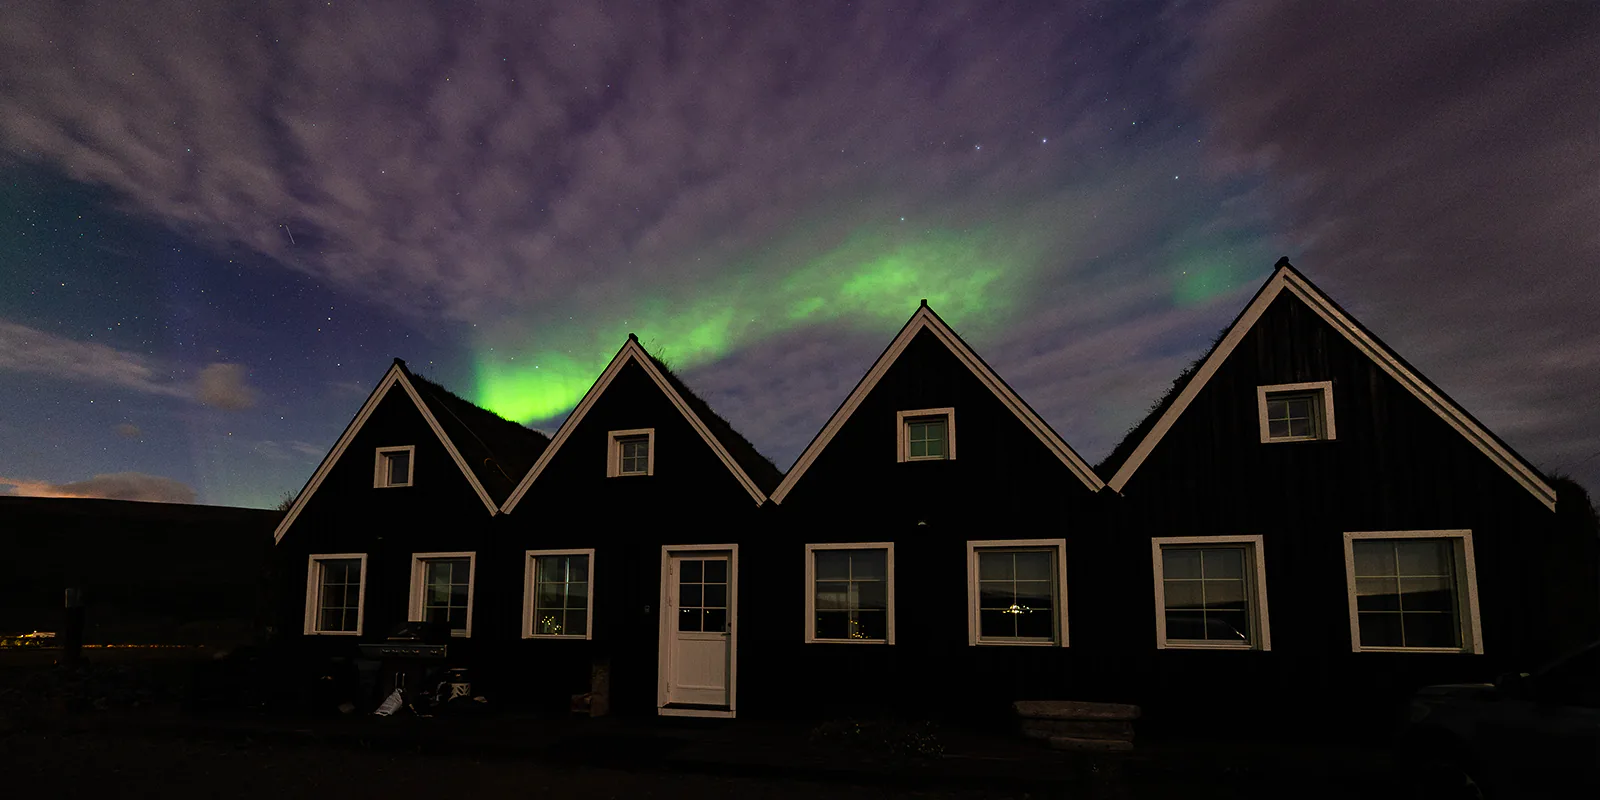 Best hotels in iceland for northern lights